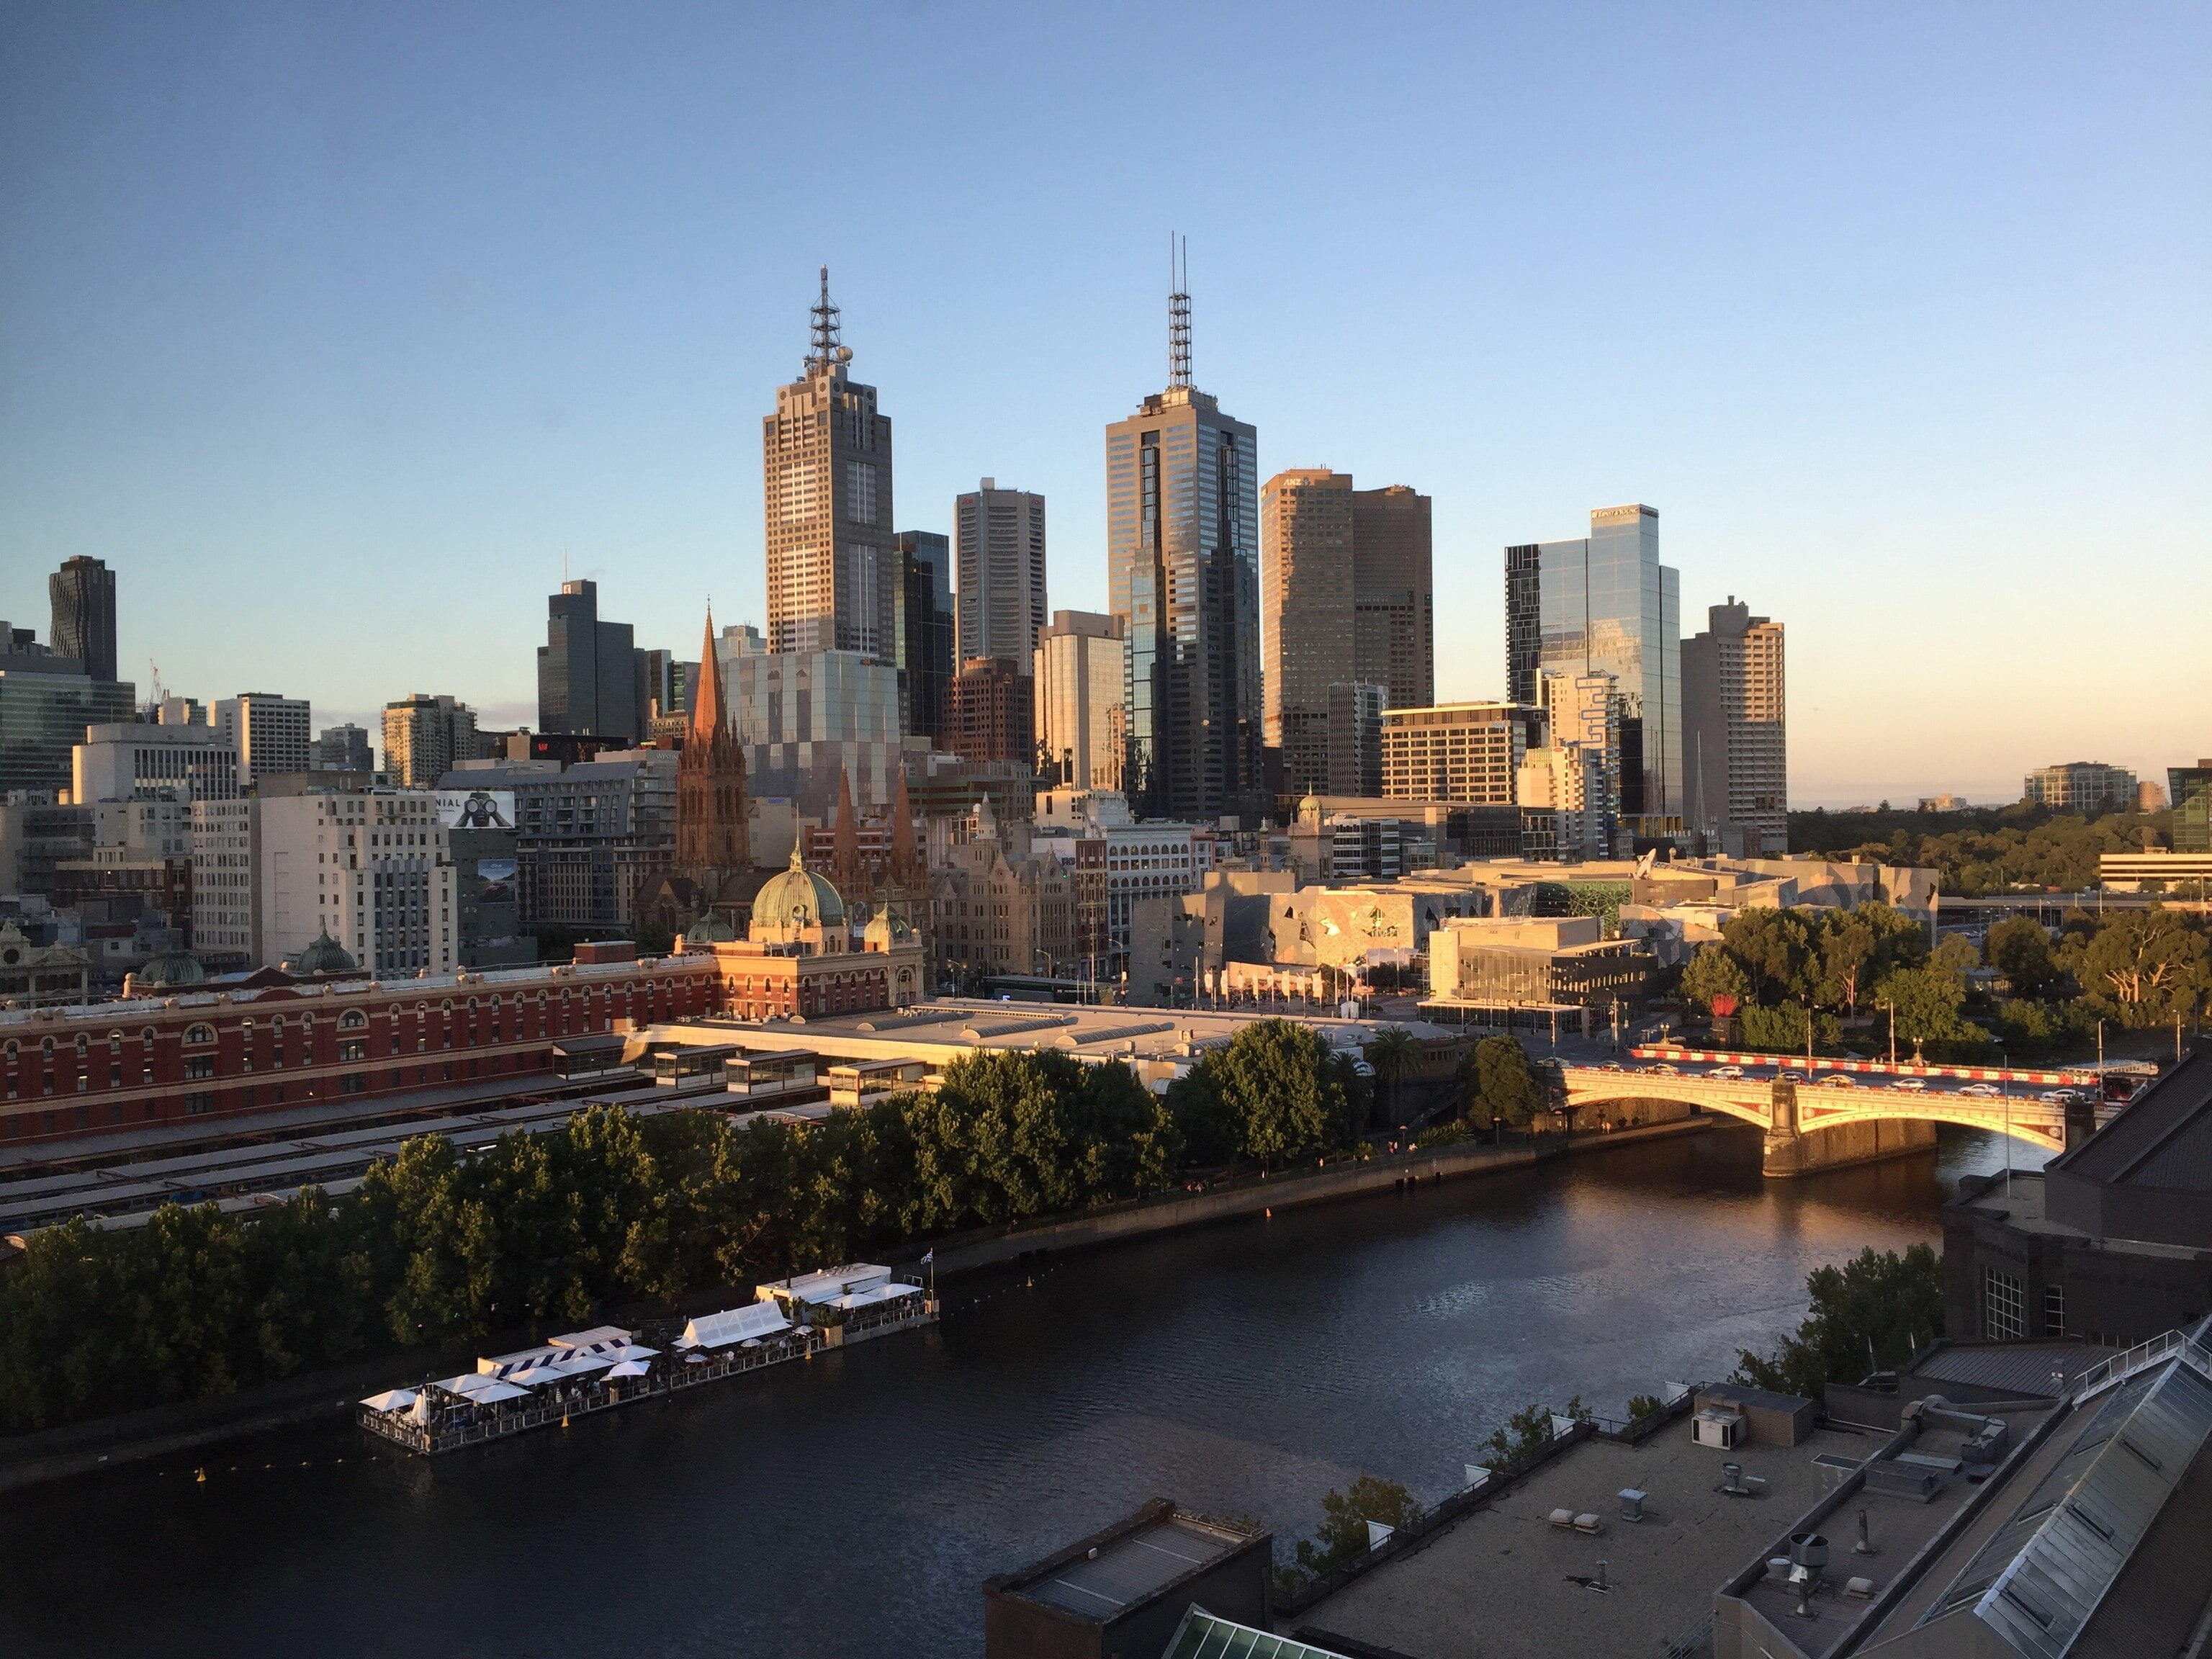 Melbourne - View of Melbourne's eastern CBD skyline from Southbank Promenade with Princes Bridge and Flinders St, 2018